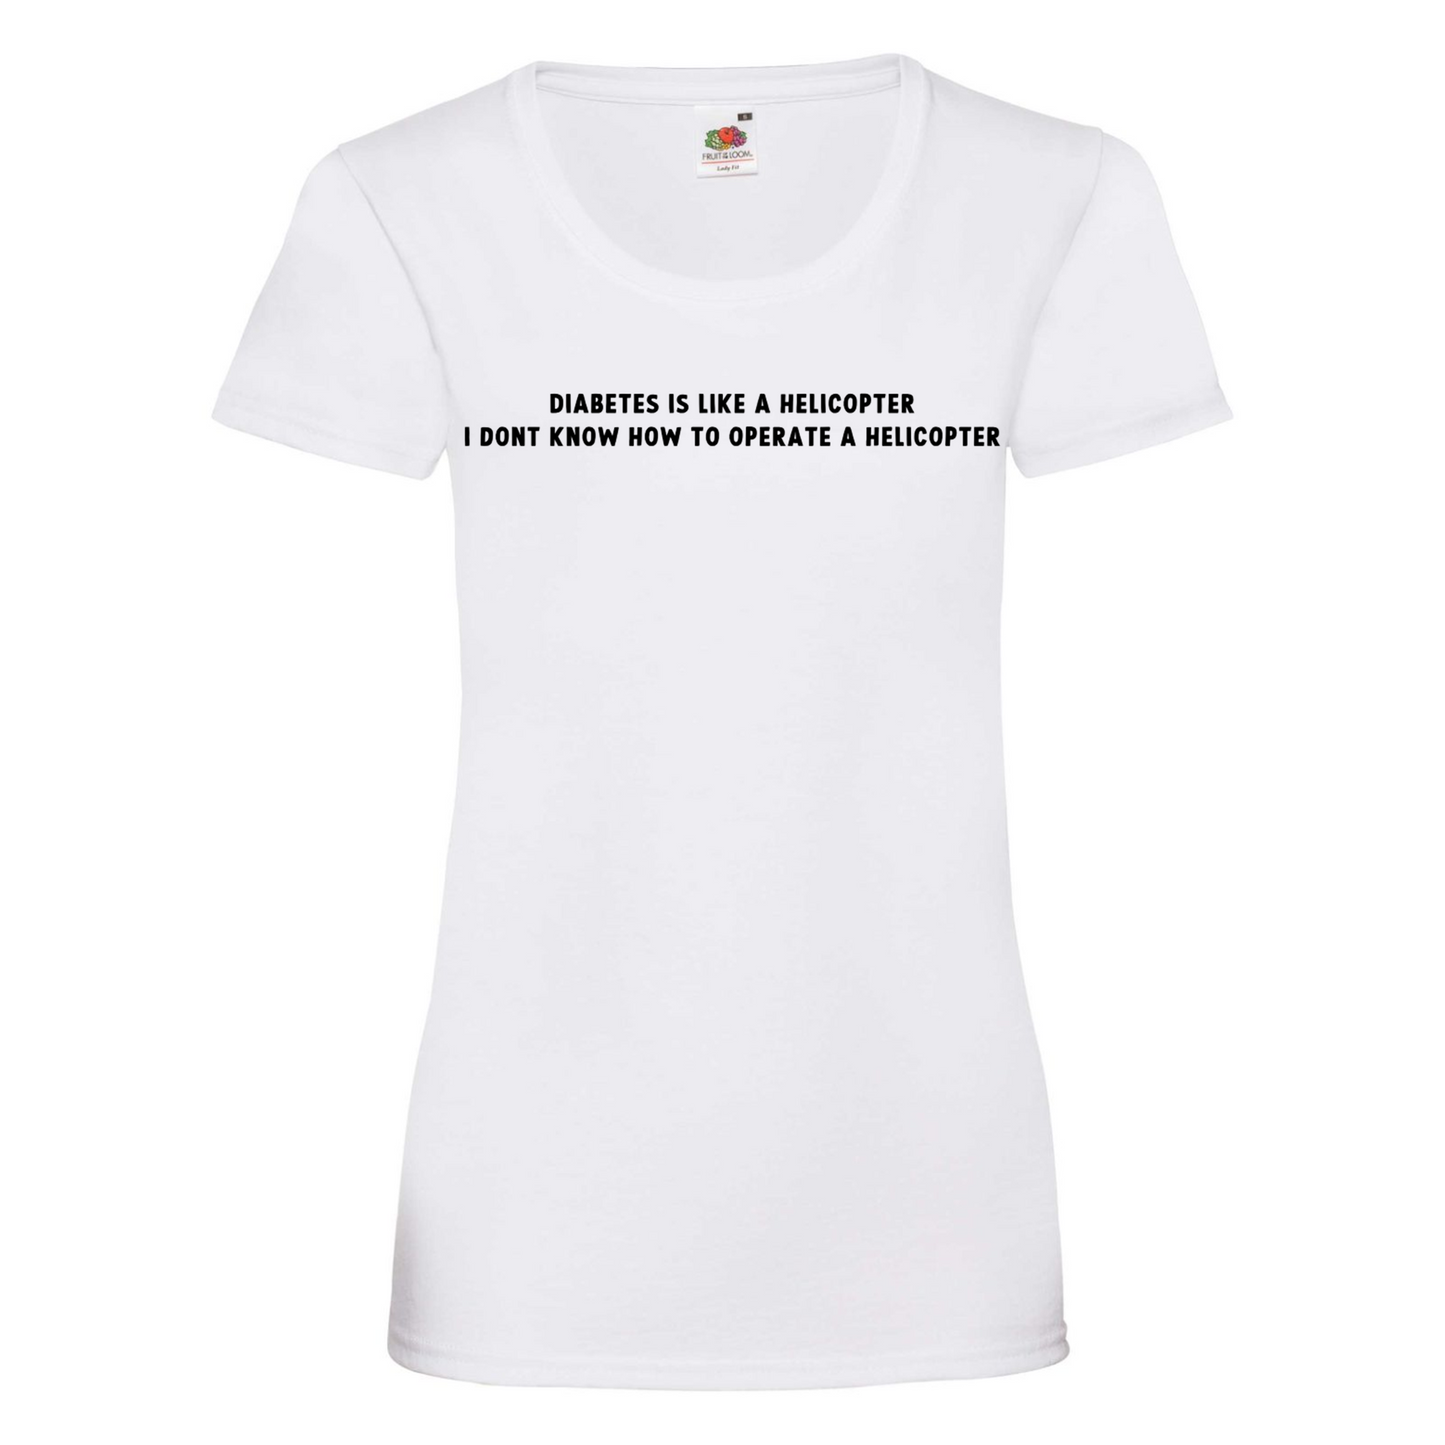 Diabetes Is Like A Helicopter, I Dont Know How To Operate A Helicopter Women's T Shirt